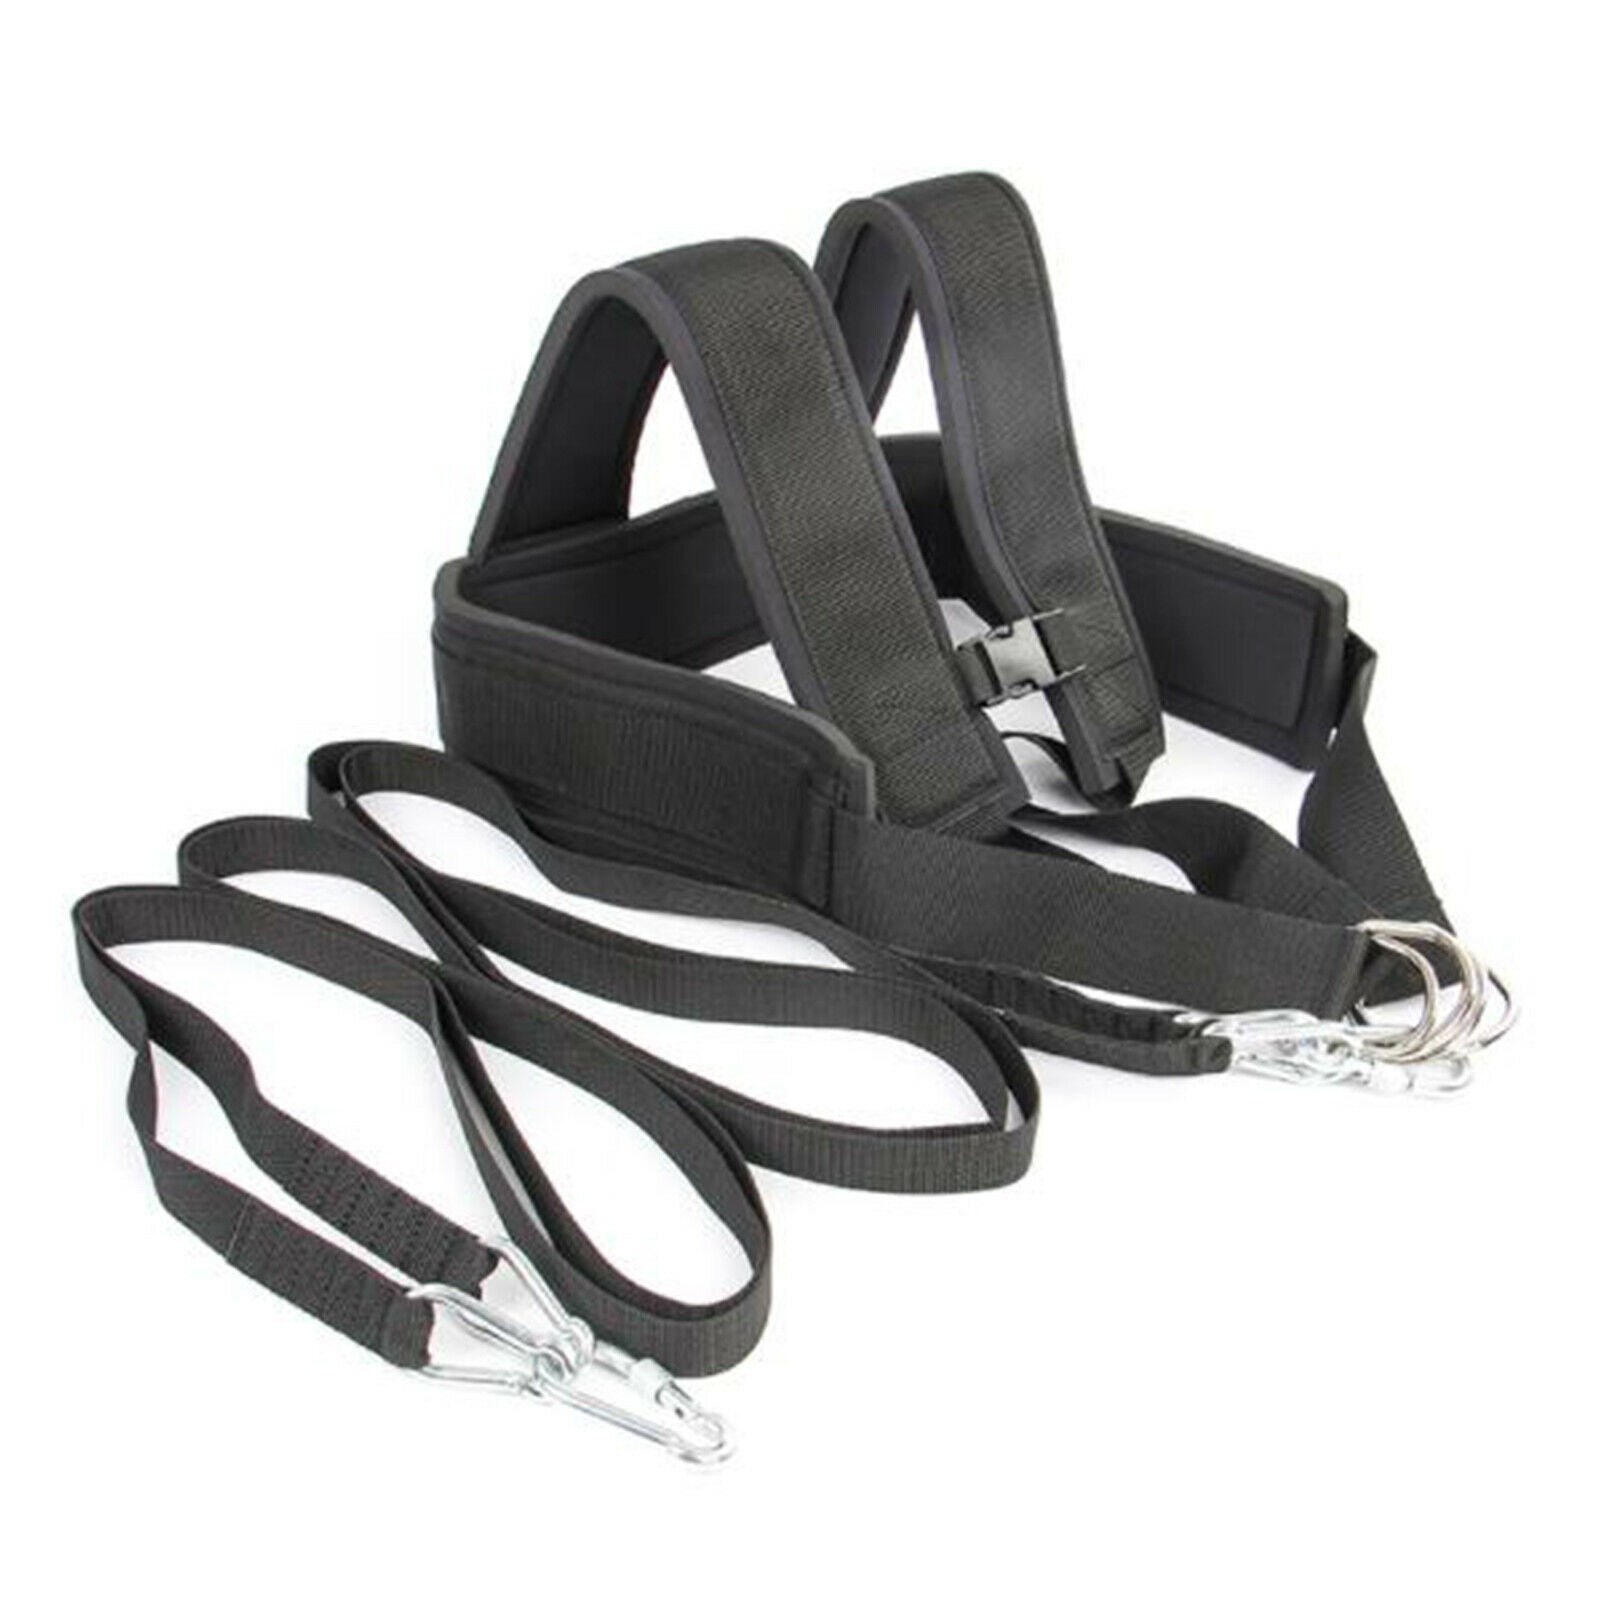 Sled Harness Kits Resistance Belt Workout Physical Training with Pull Strap